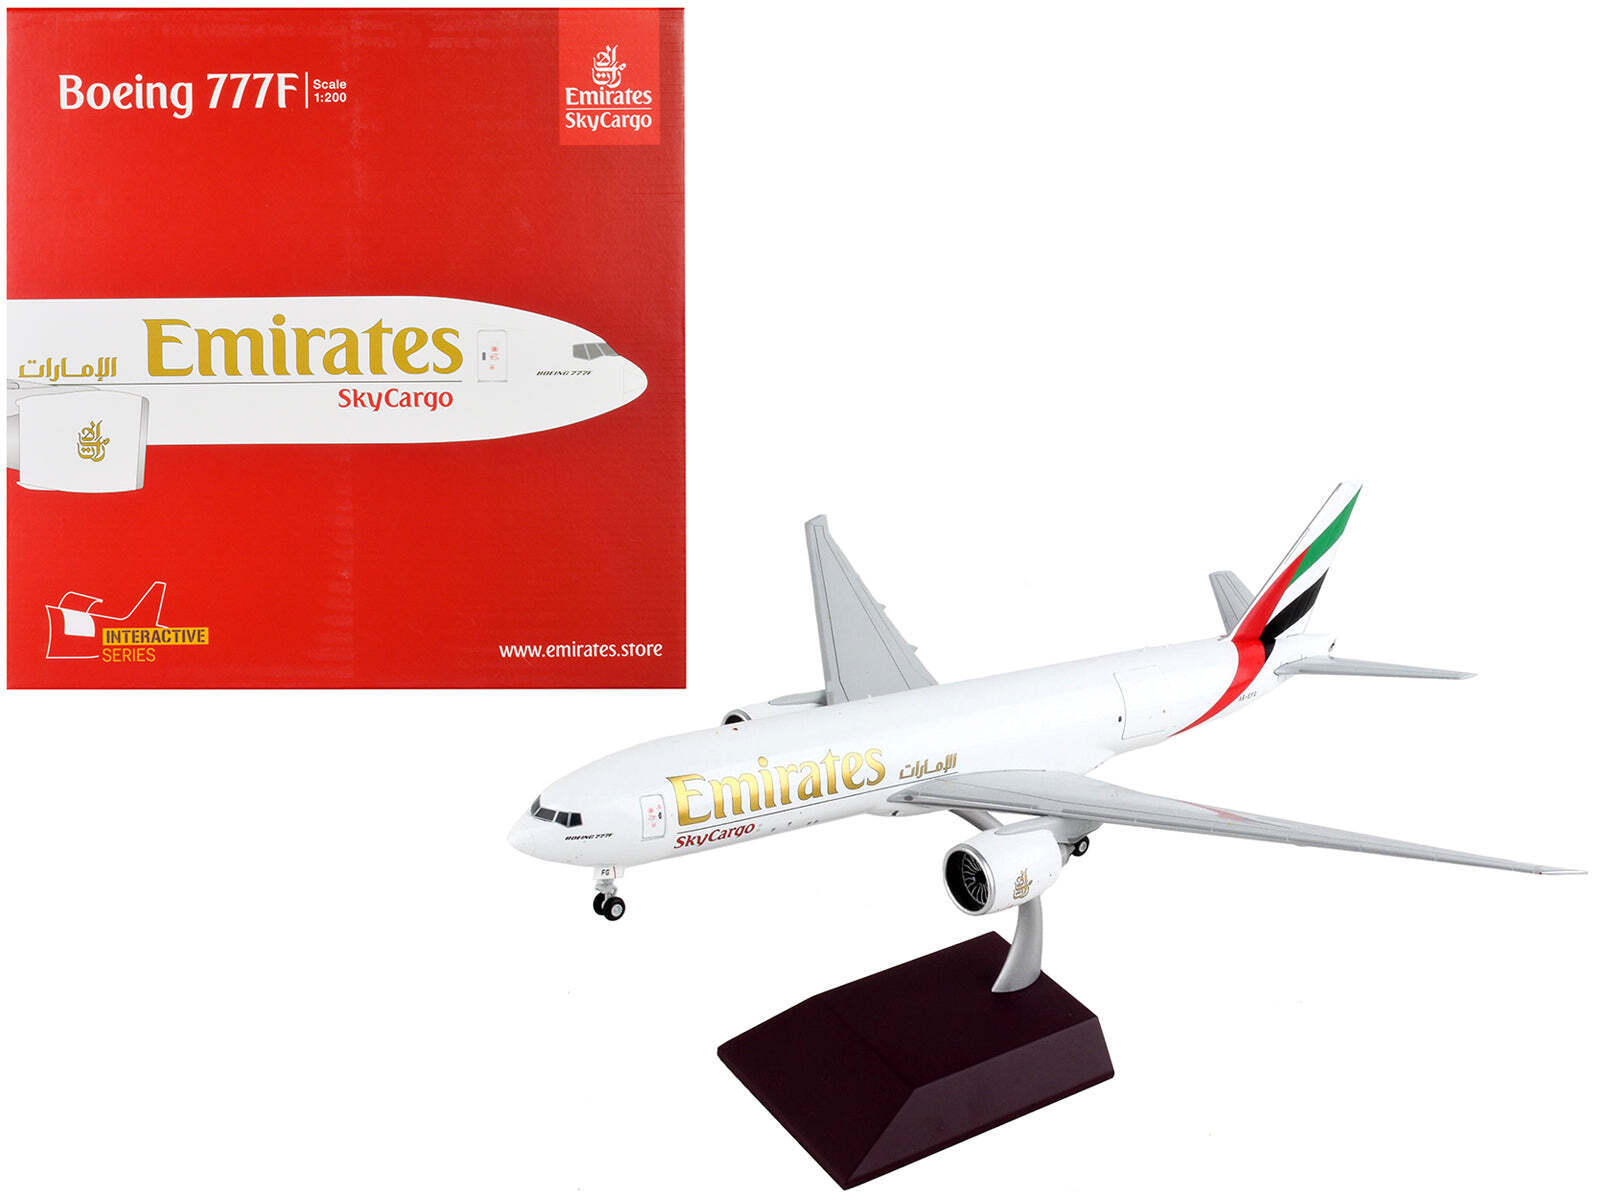 Boeing 777F Commercial Emirates Airlines - SkyCargo 1/200 Diecast Model Airplane